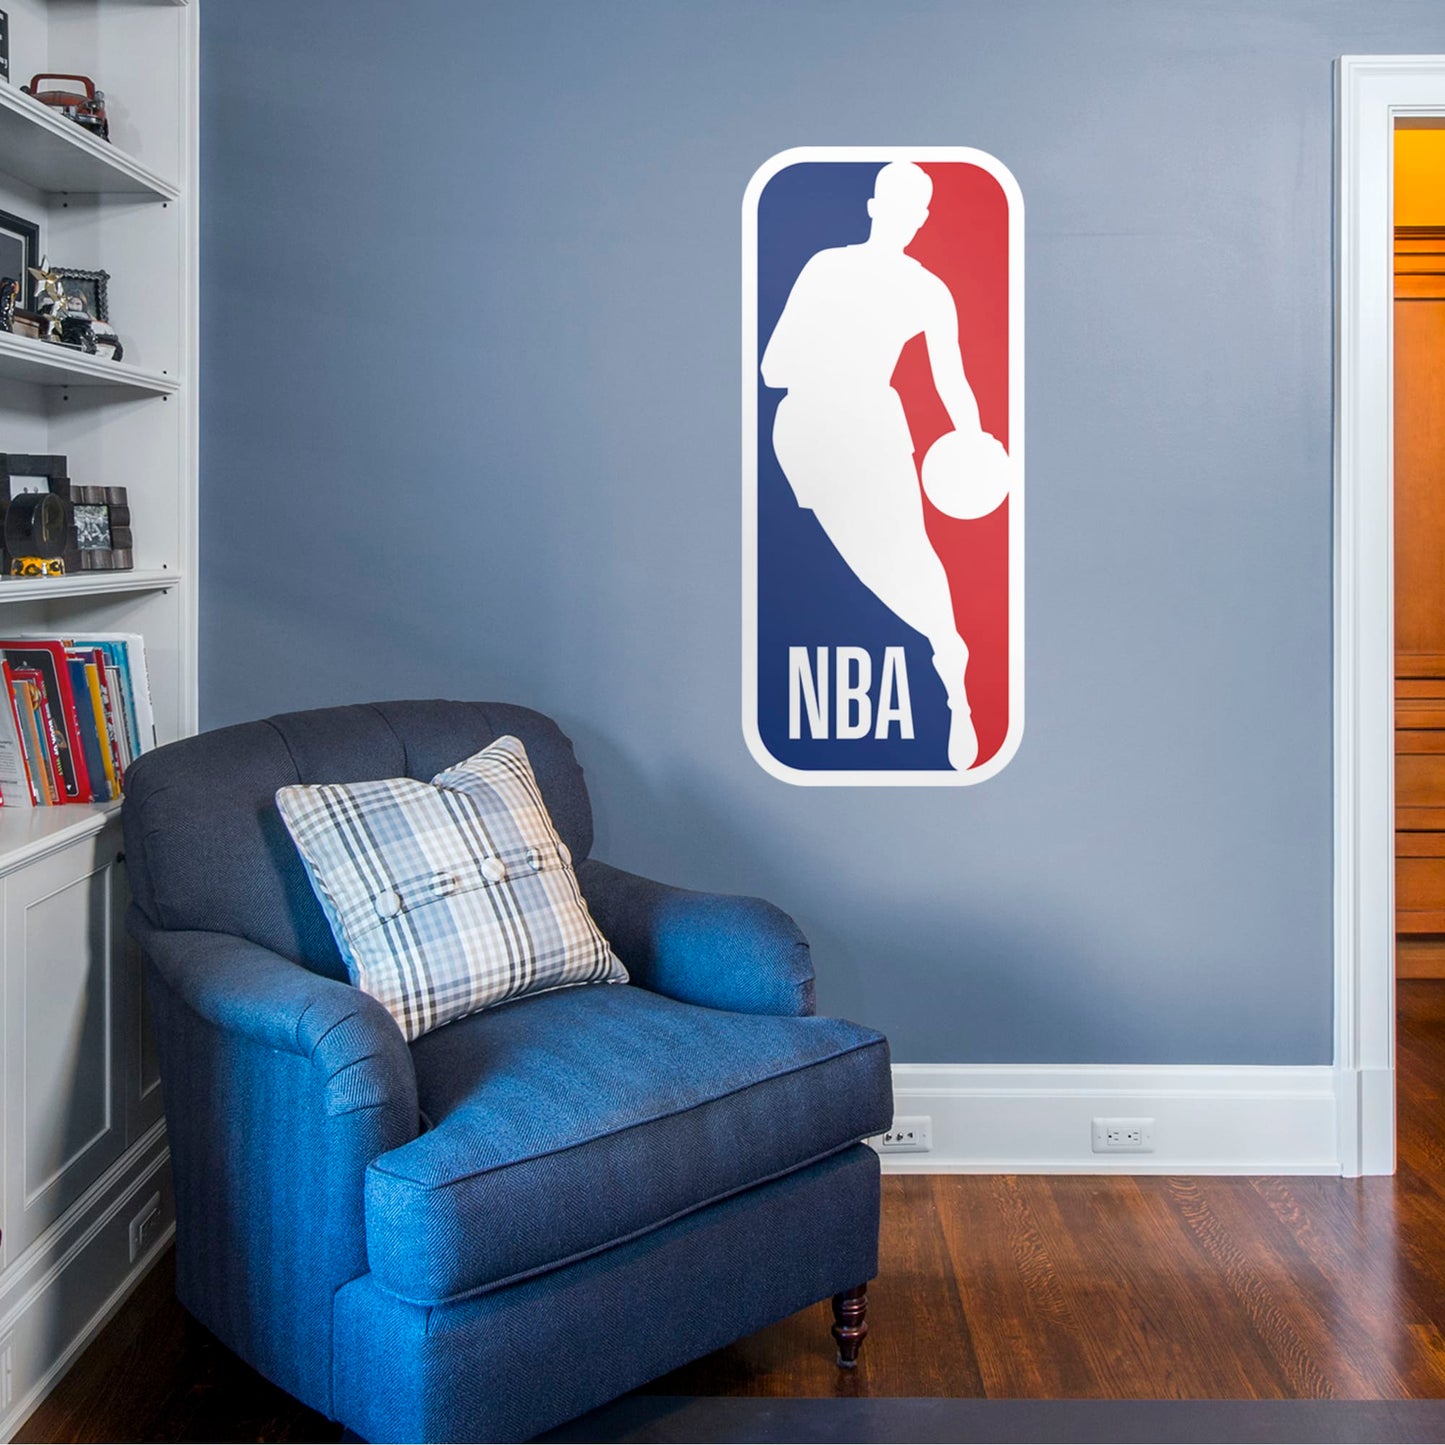 NBA: Logo - Officially Licensed NBA Removable Wall Decal